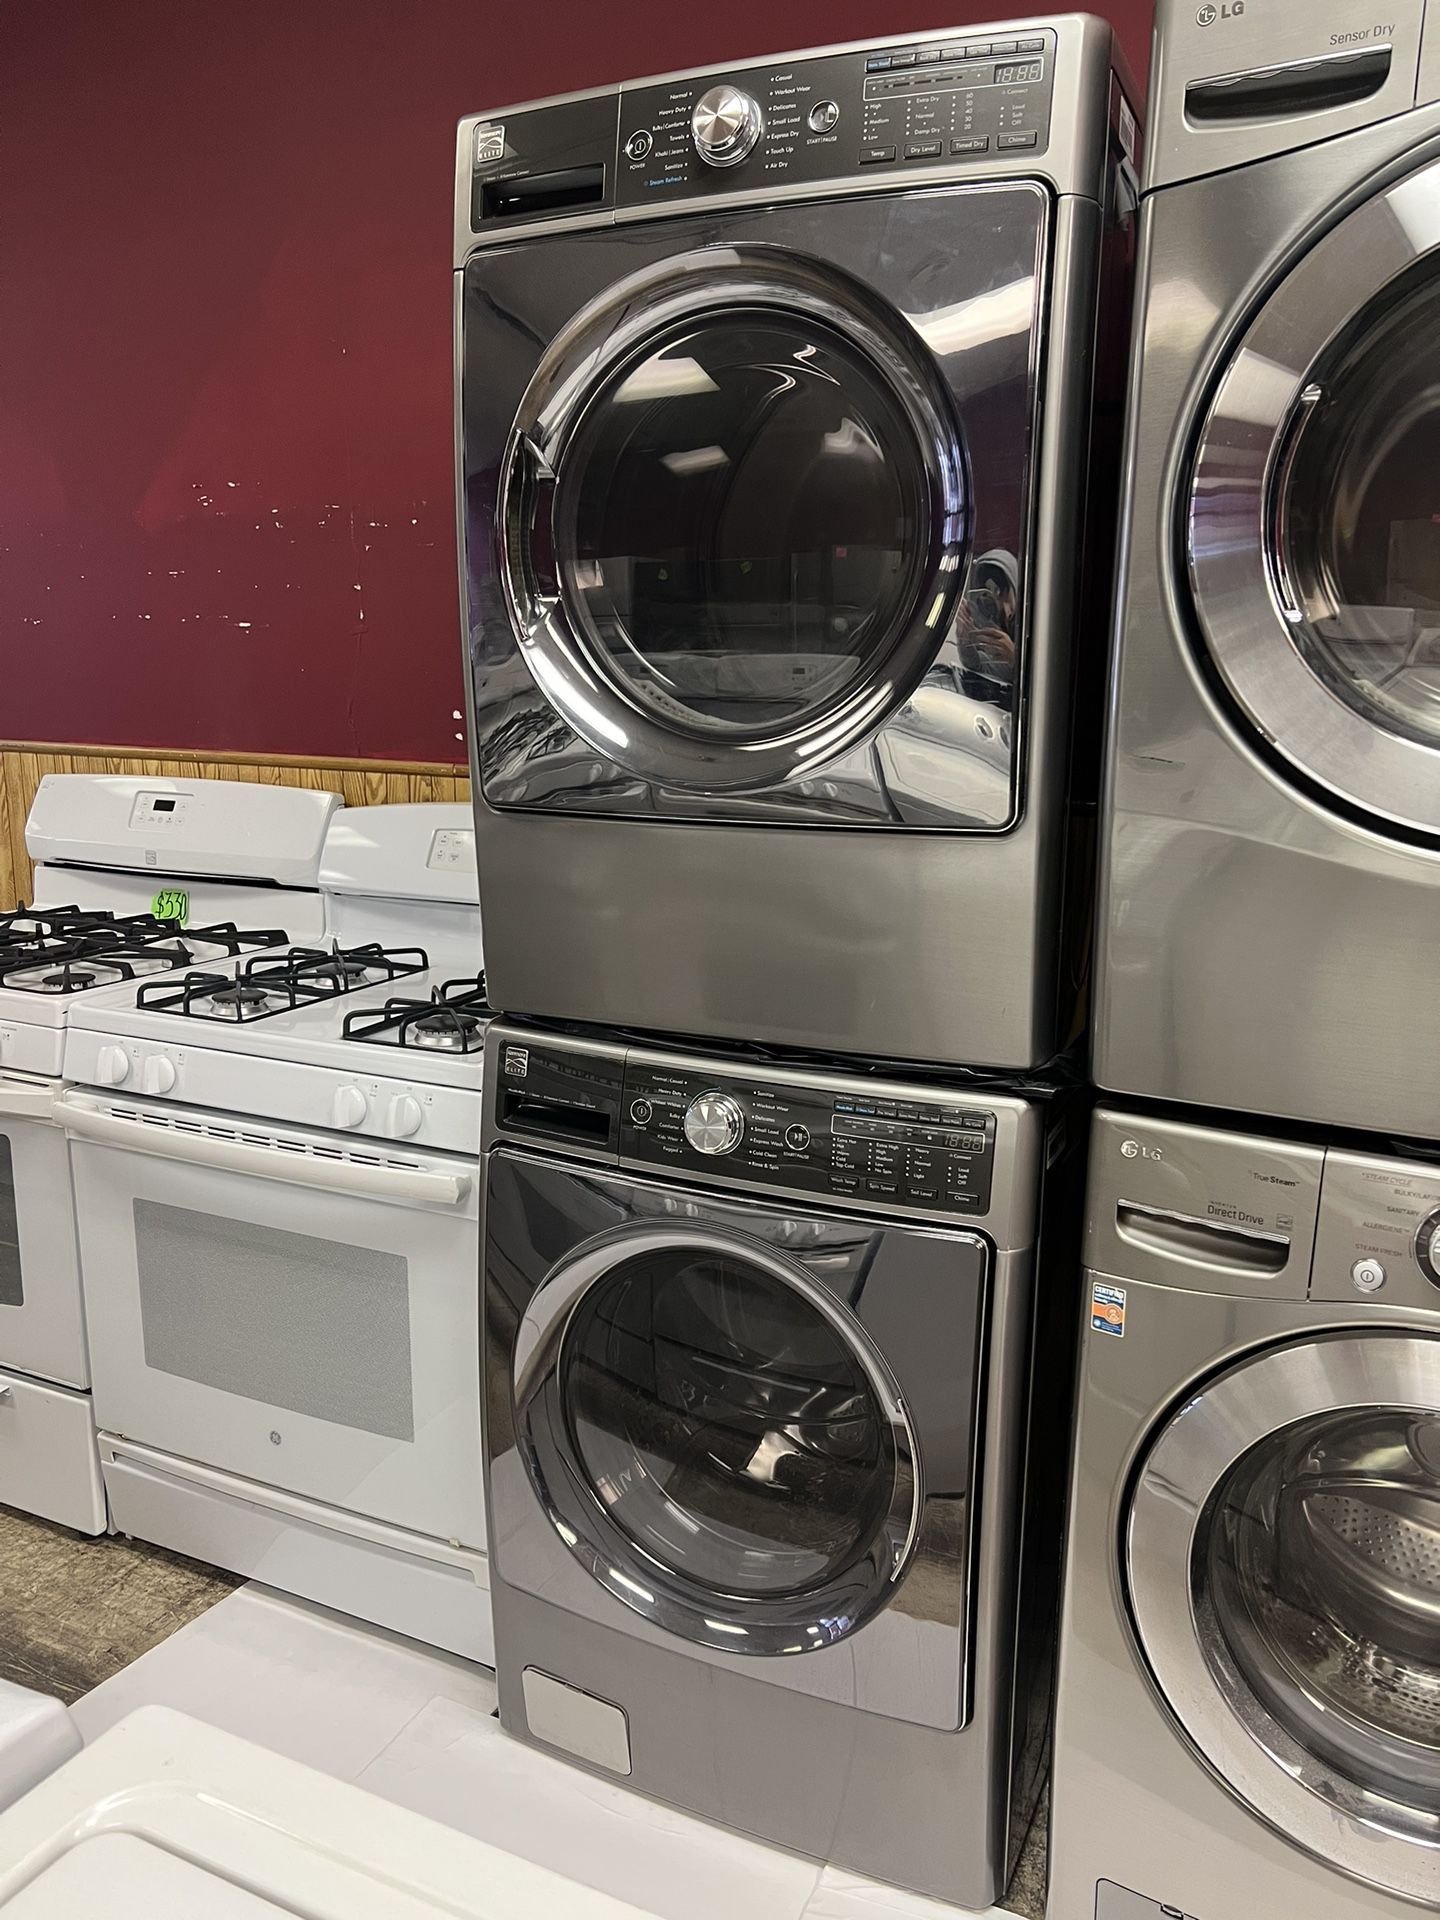 Dryer Washer Kenmore Stackable 